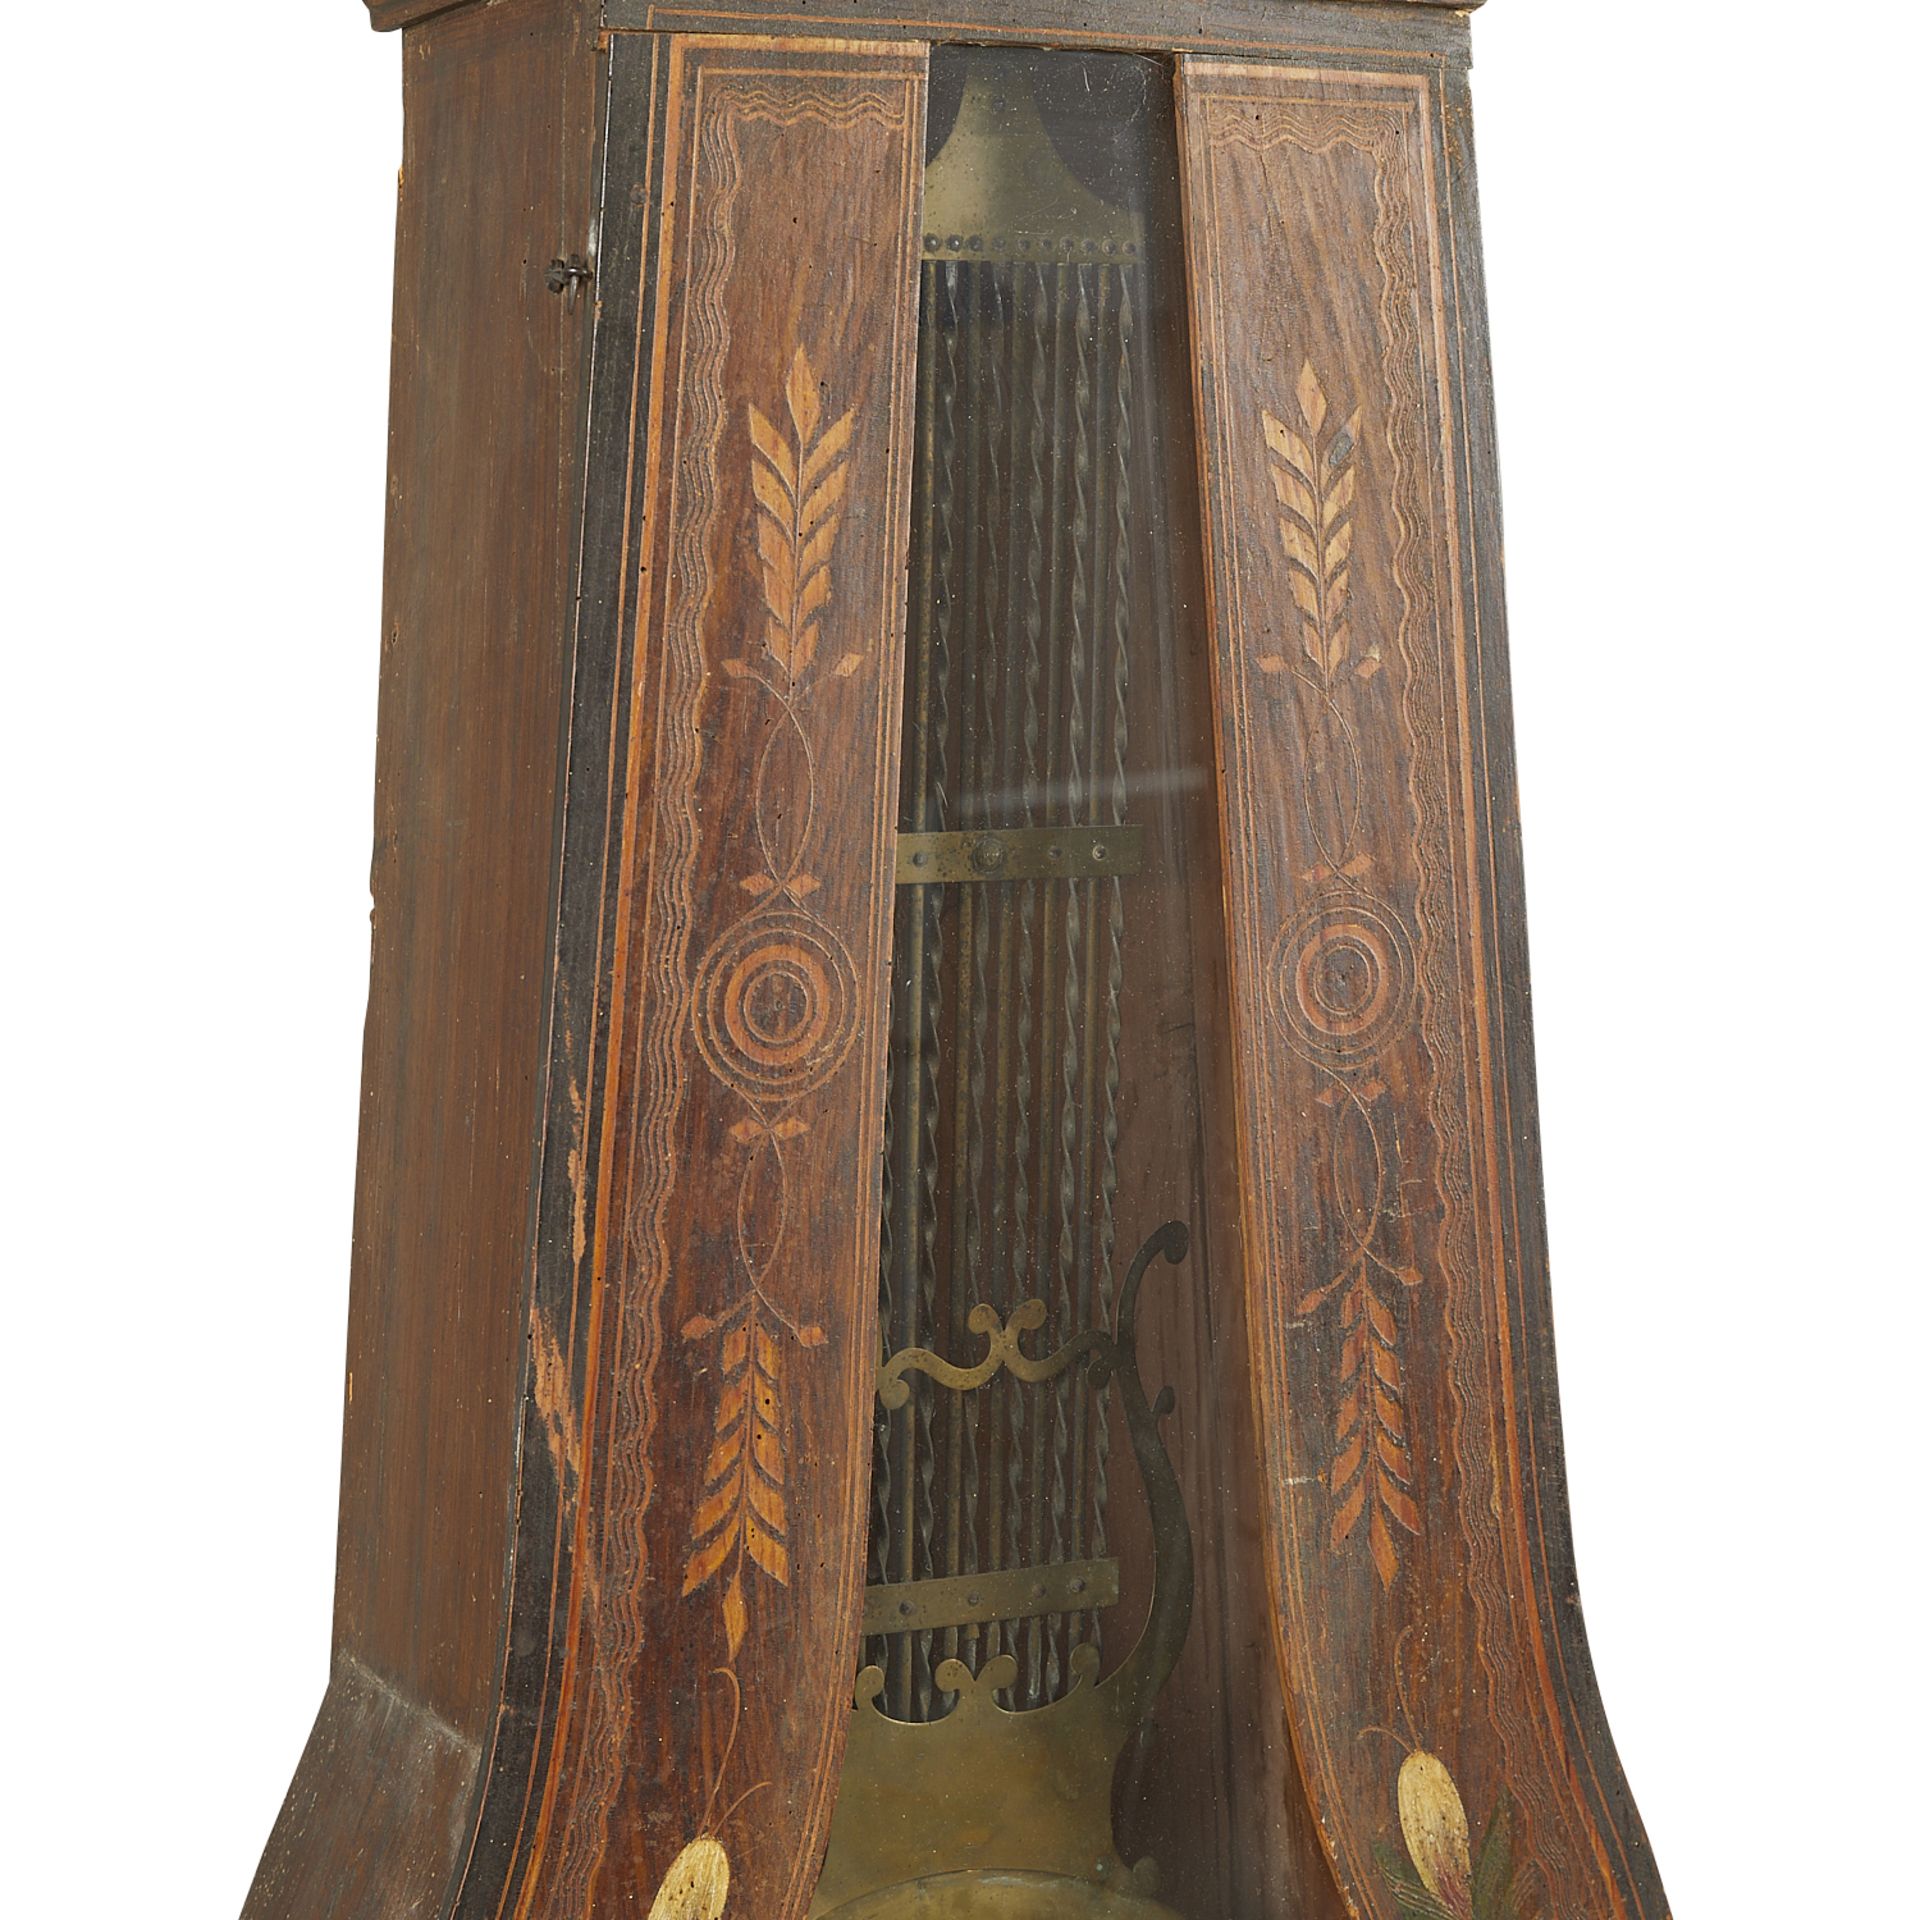 Delarue French Country Painted Grandfather Clock - Image 13 of 22